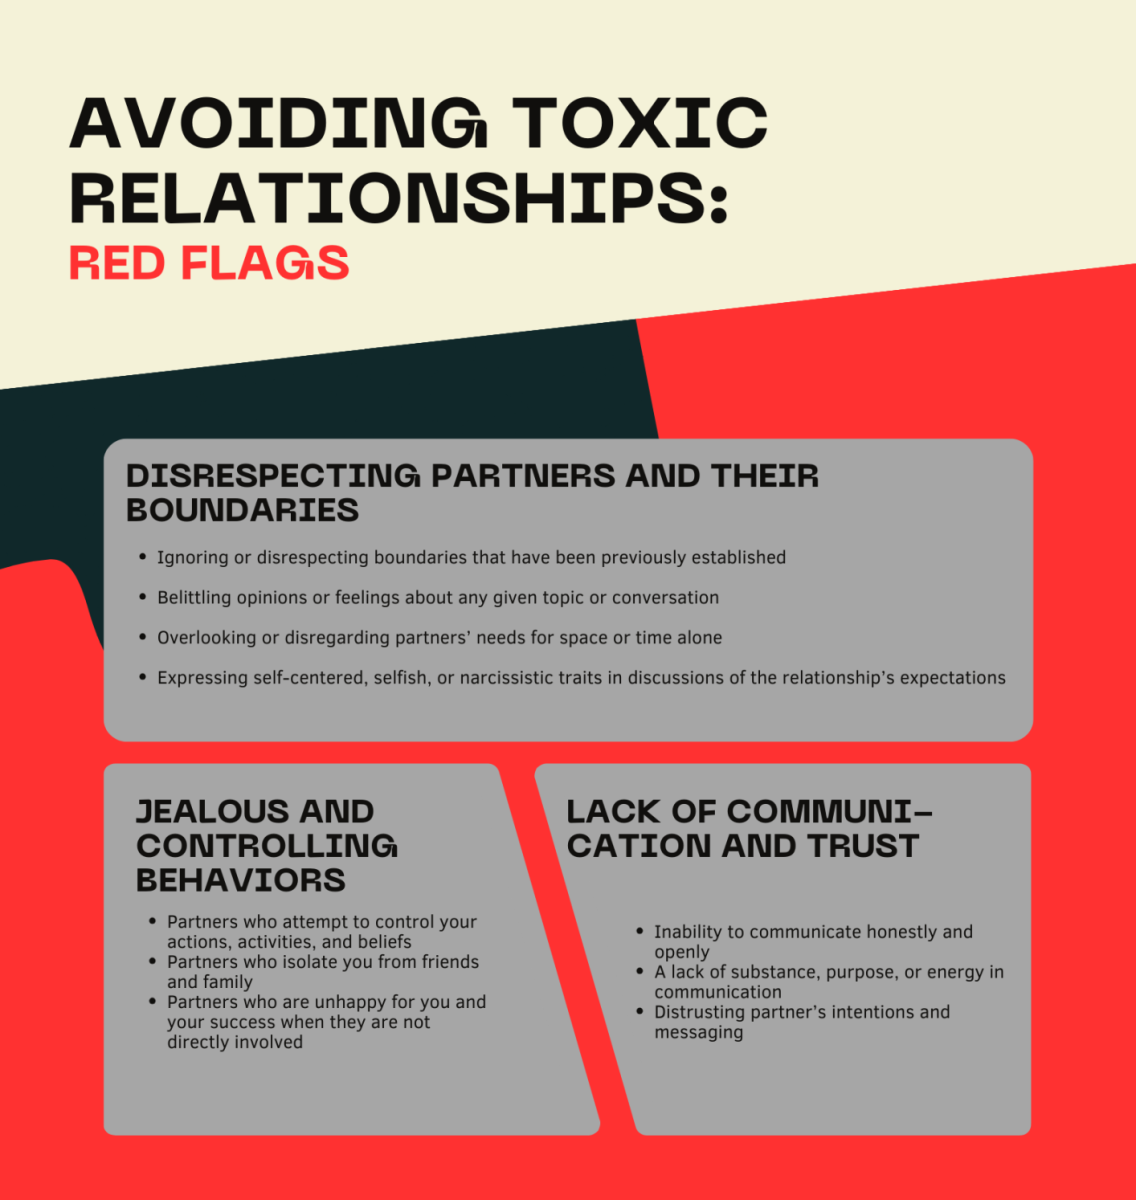 Red+flags+in+relationships+can+present+themselves+in+many+ways%2C+including+patterns+of+disrespect%2C+jealous+and+controlling+behaviors%2C+and+lack+of+communication.